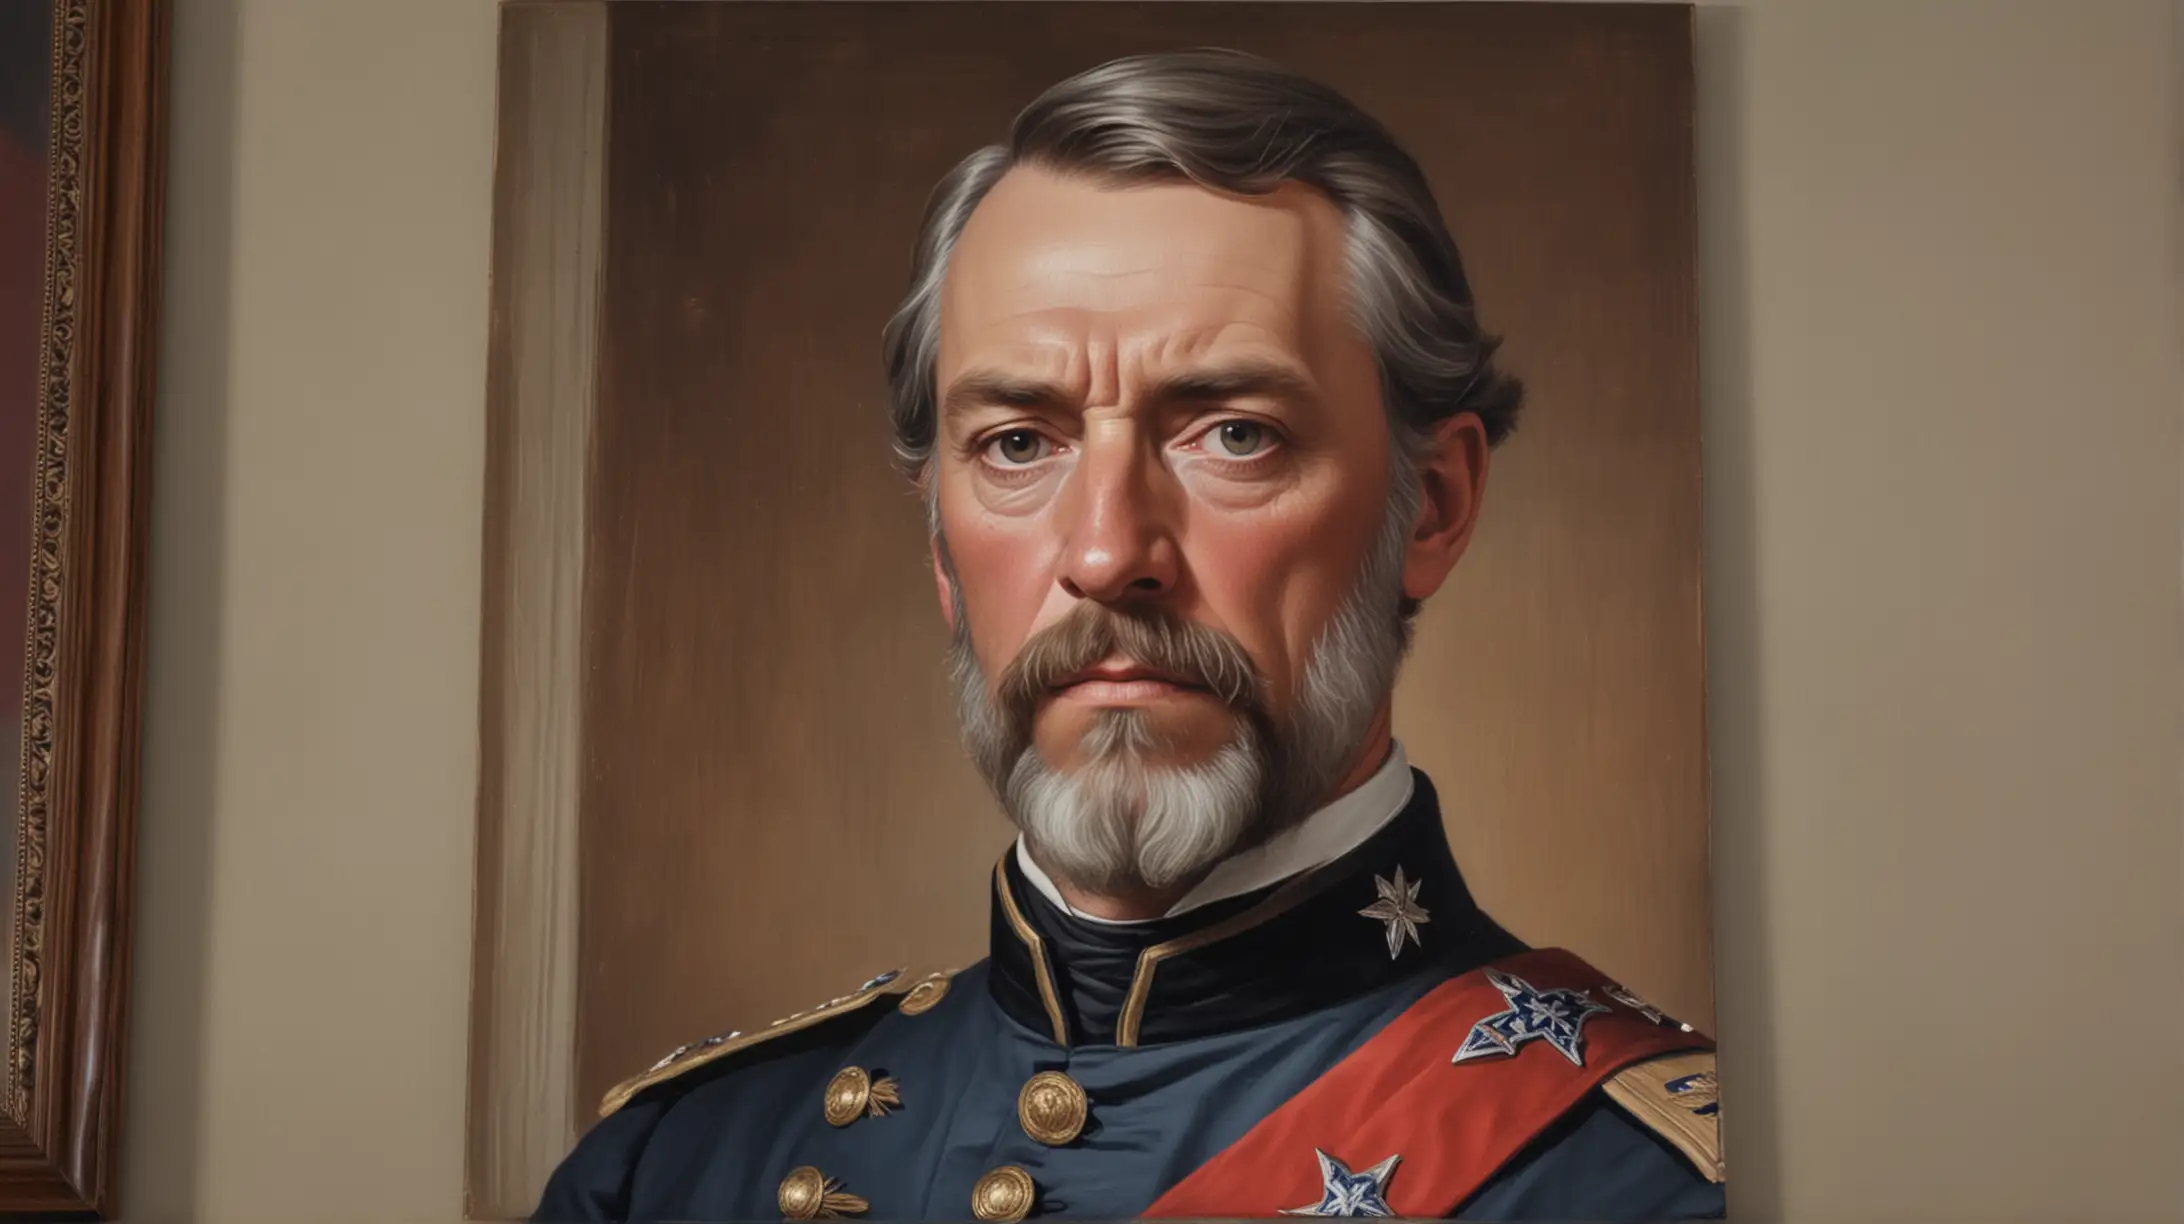 A close-up of a painting of a confederate general in the study of a nice suburban house.